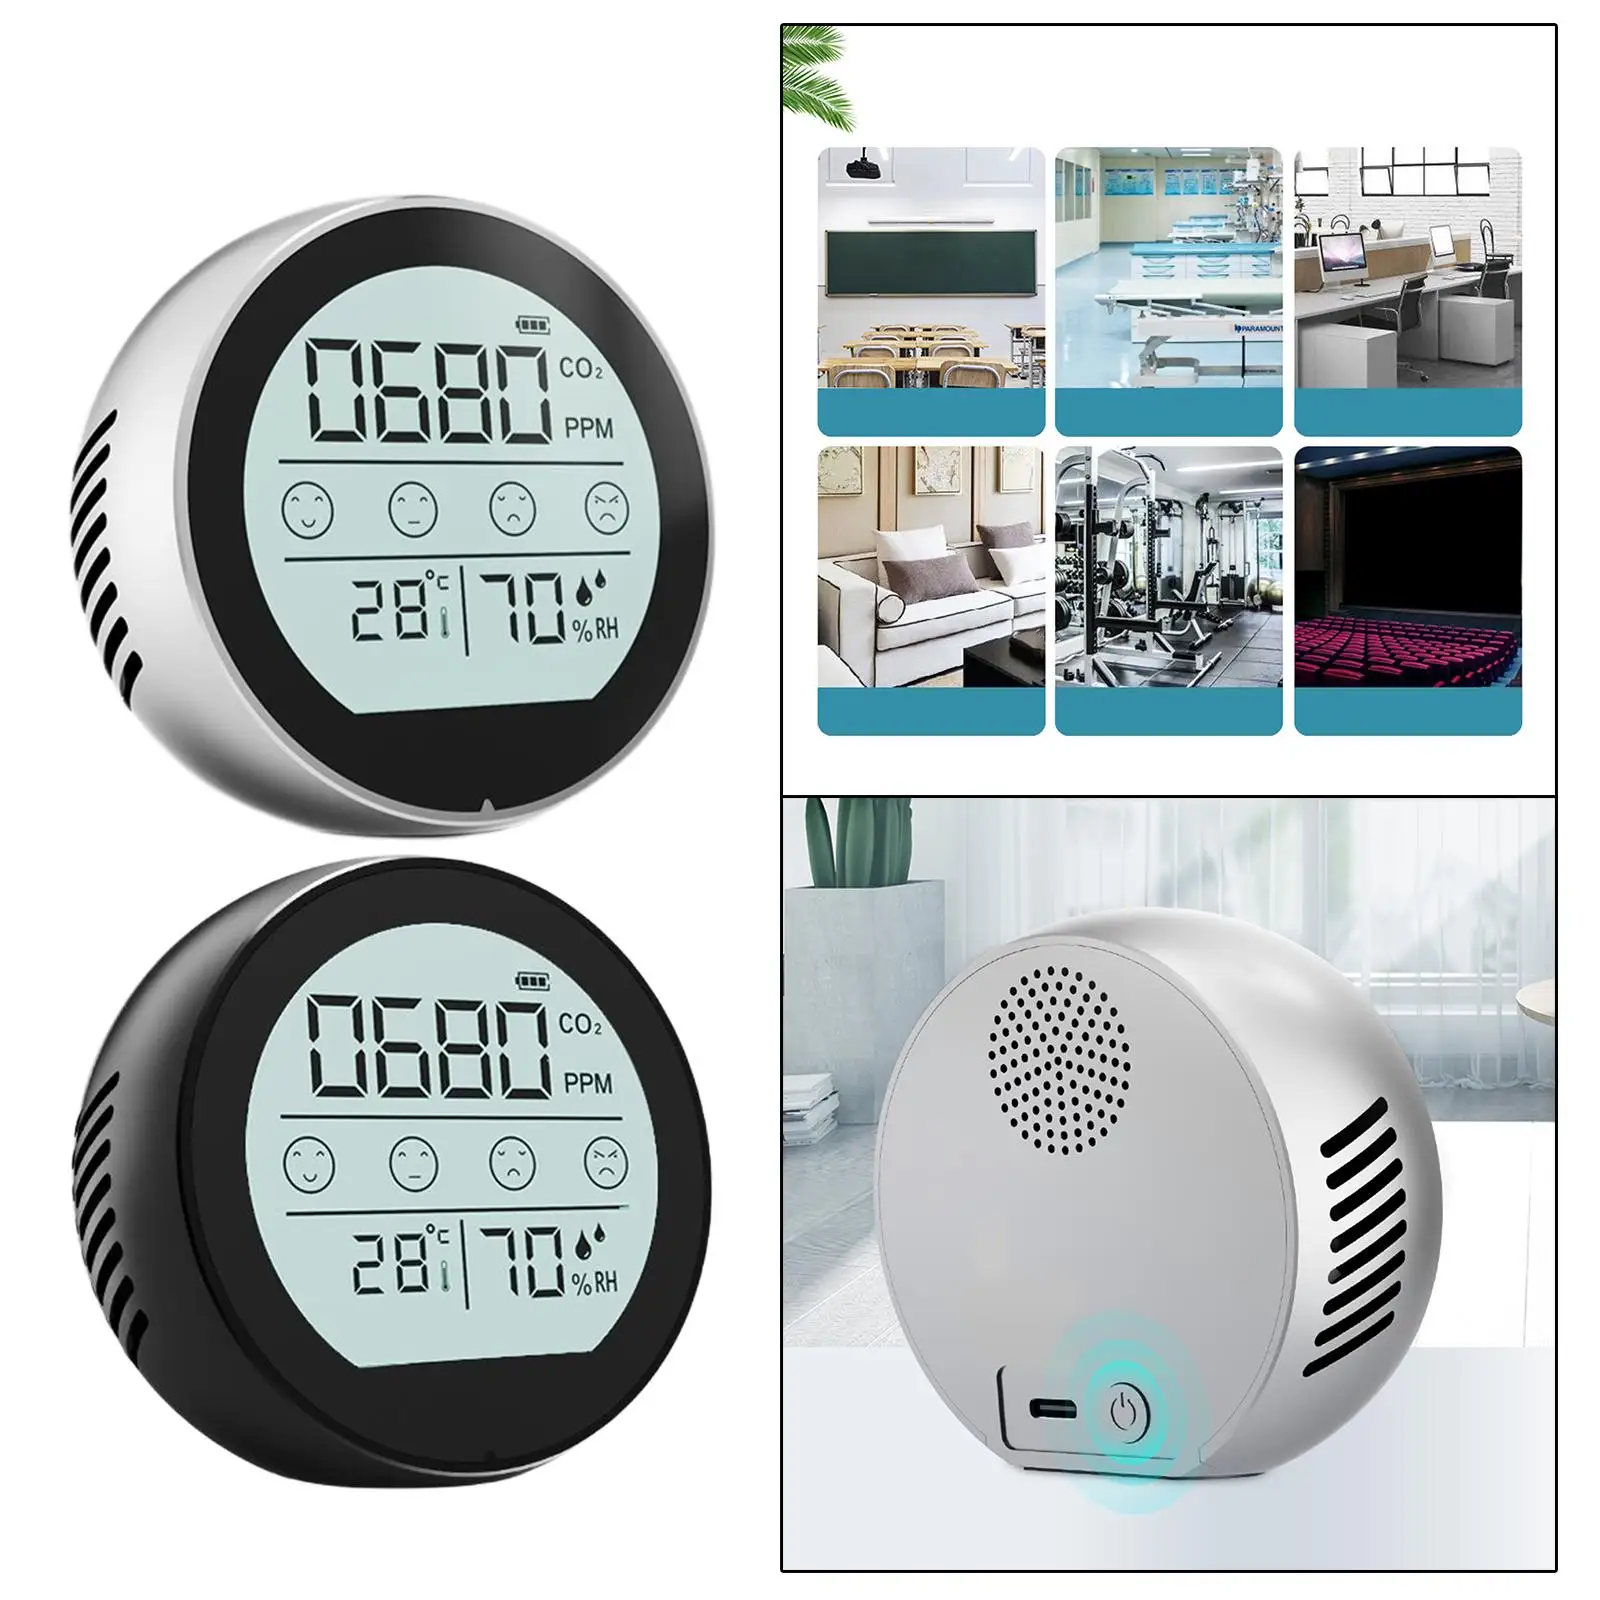  Dioxide Monitor NDIR Sensor  Temperature Humidity Monitor for Workplace